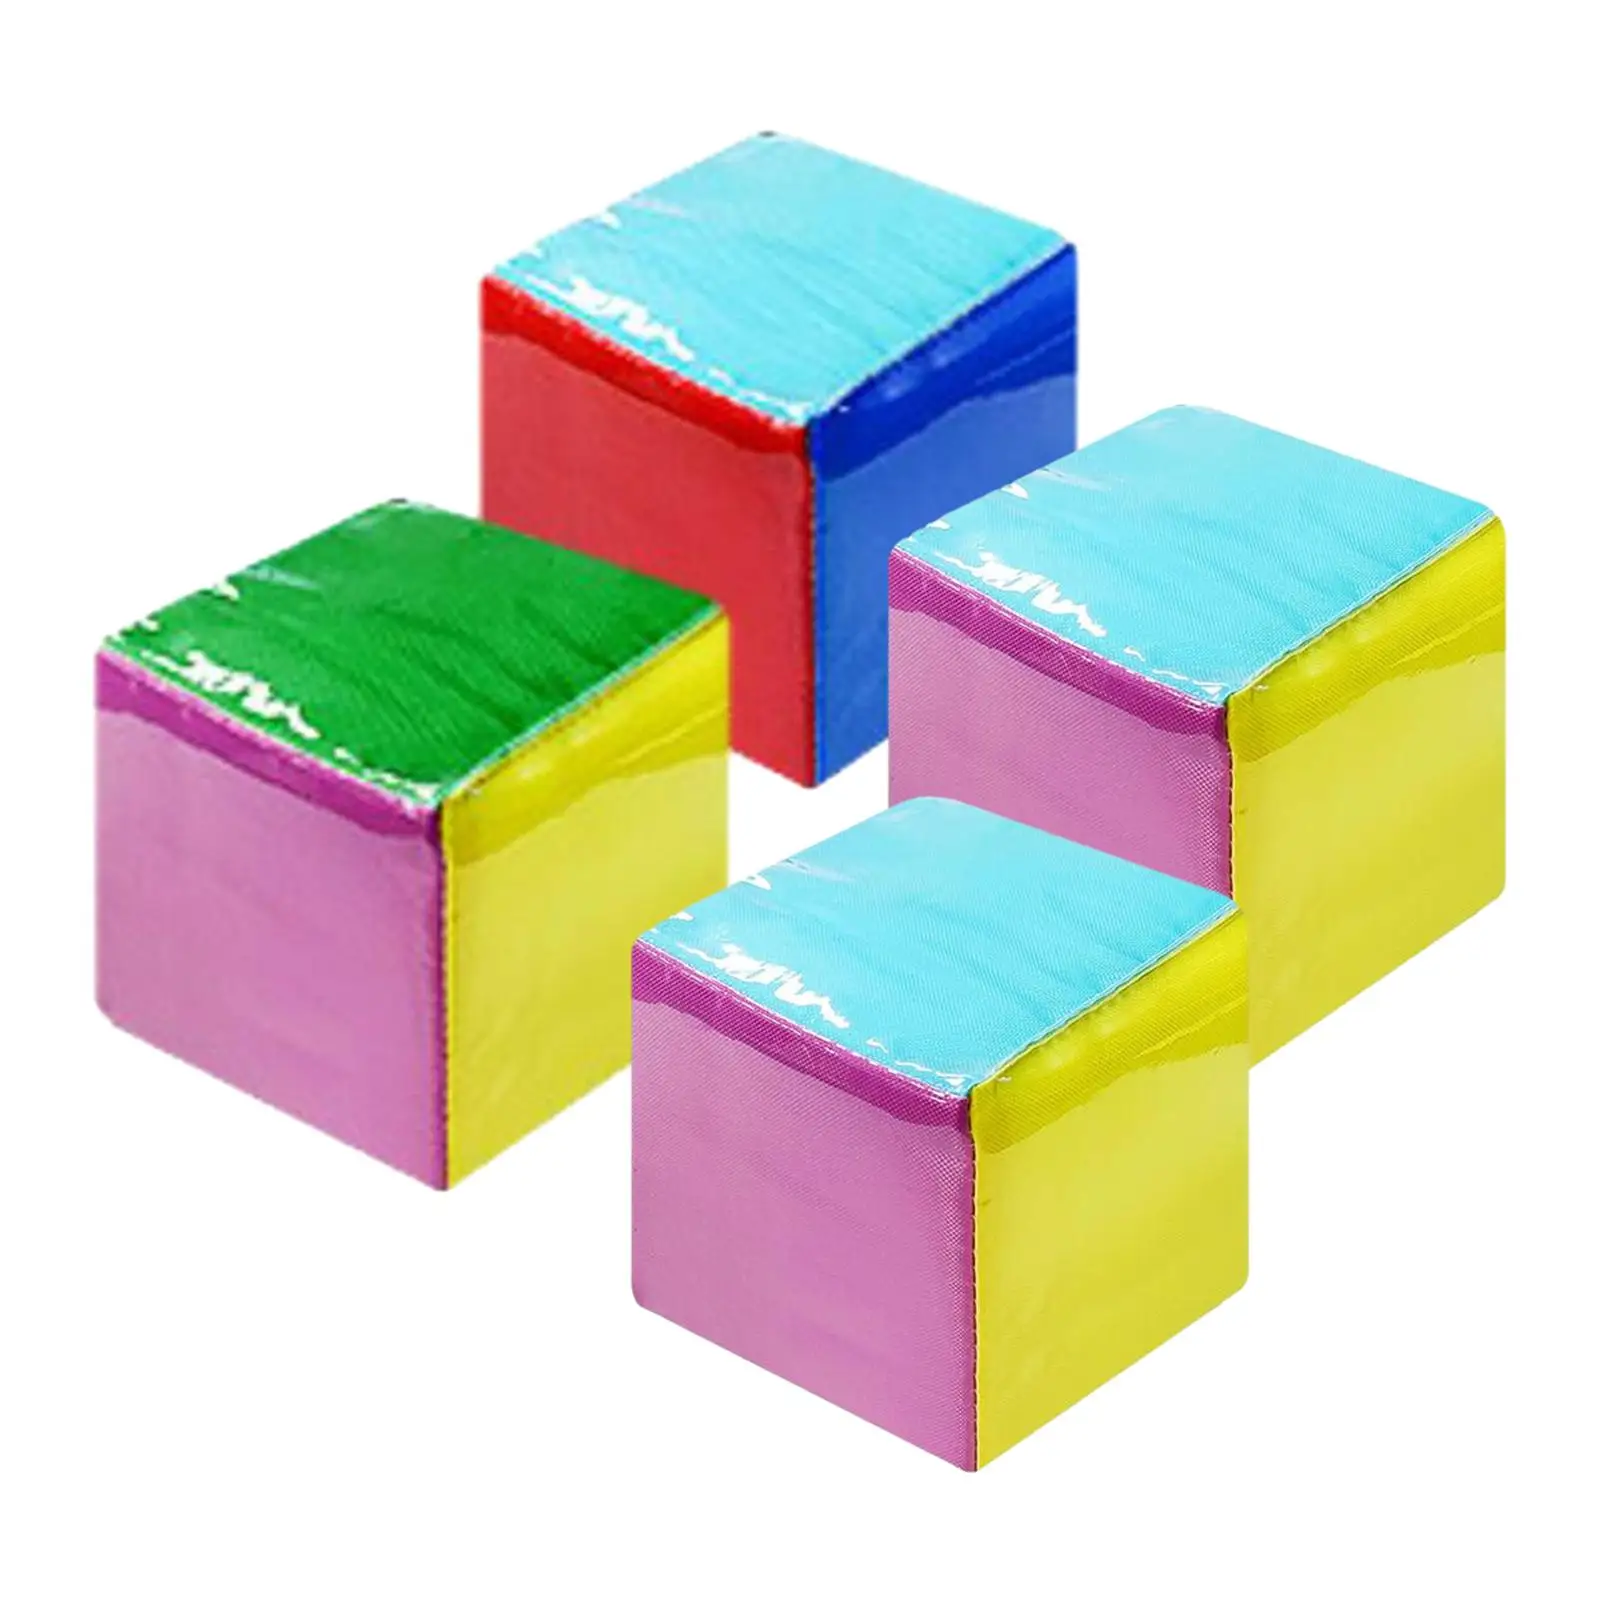 Soft Pocket Cubes 3.94 inch Large Dice Plush Cube with Clear Pocket for Kindergarten Birthday Gift 3.94 x 3.94 x 3.94Inches